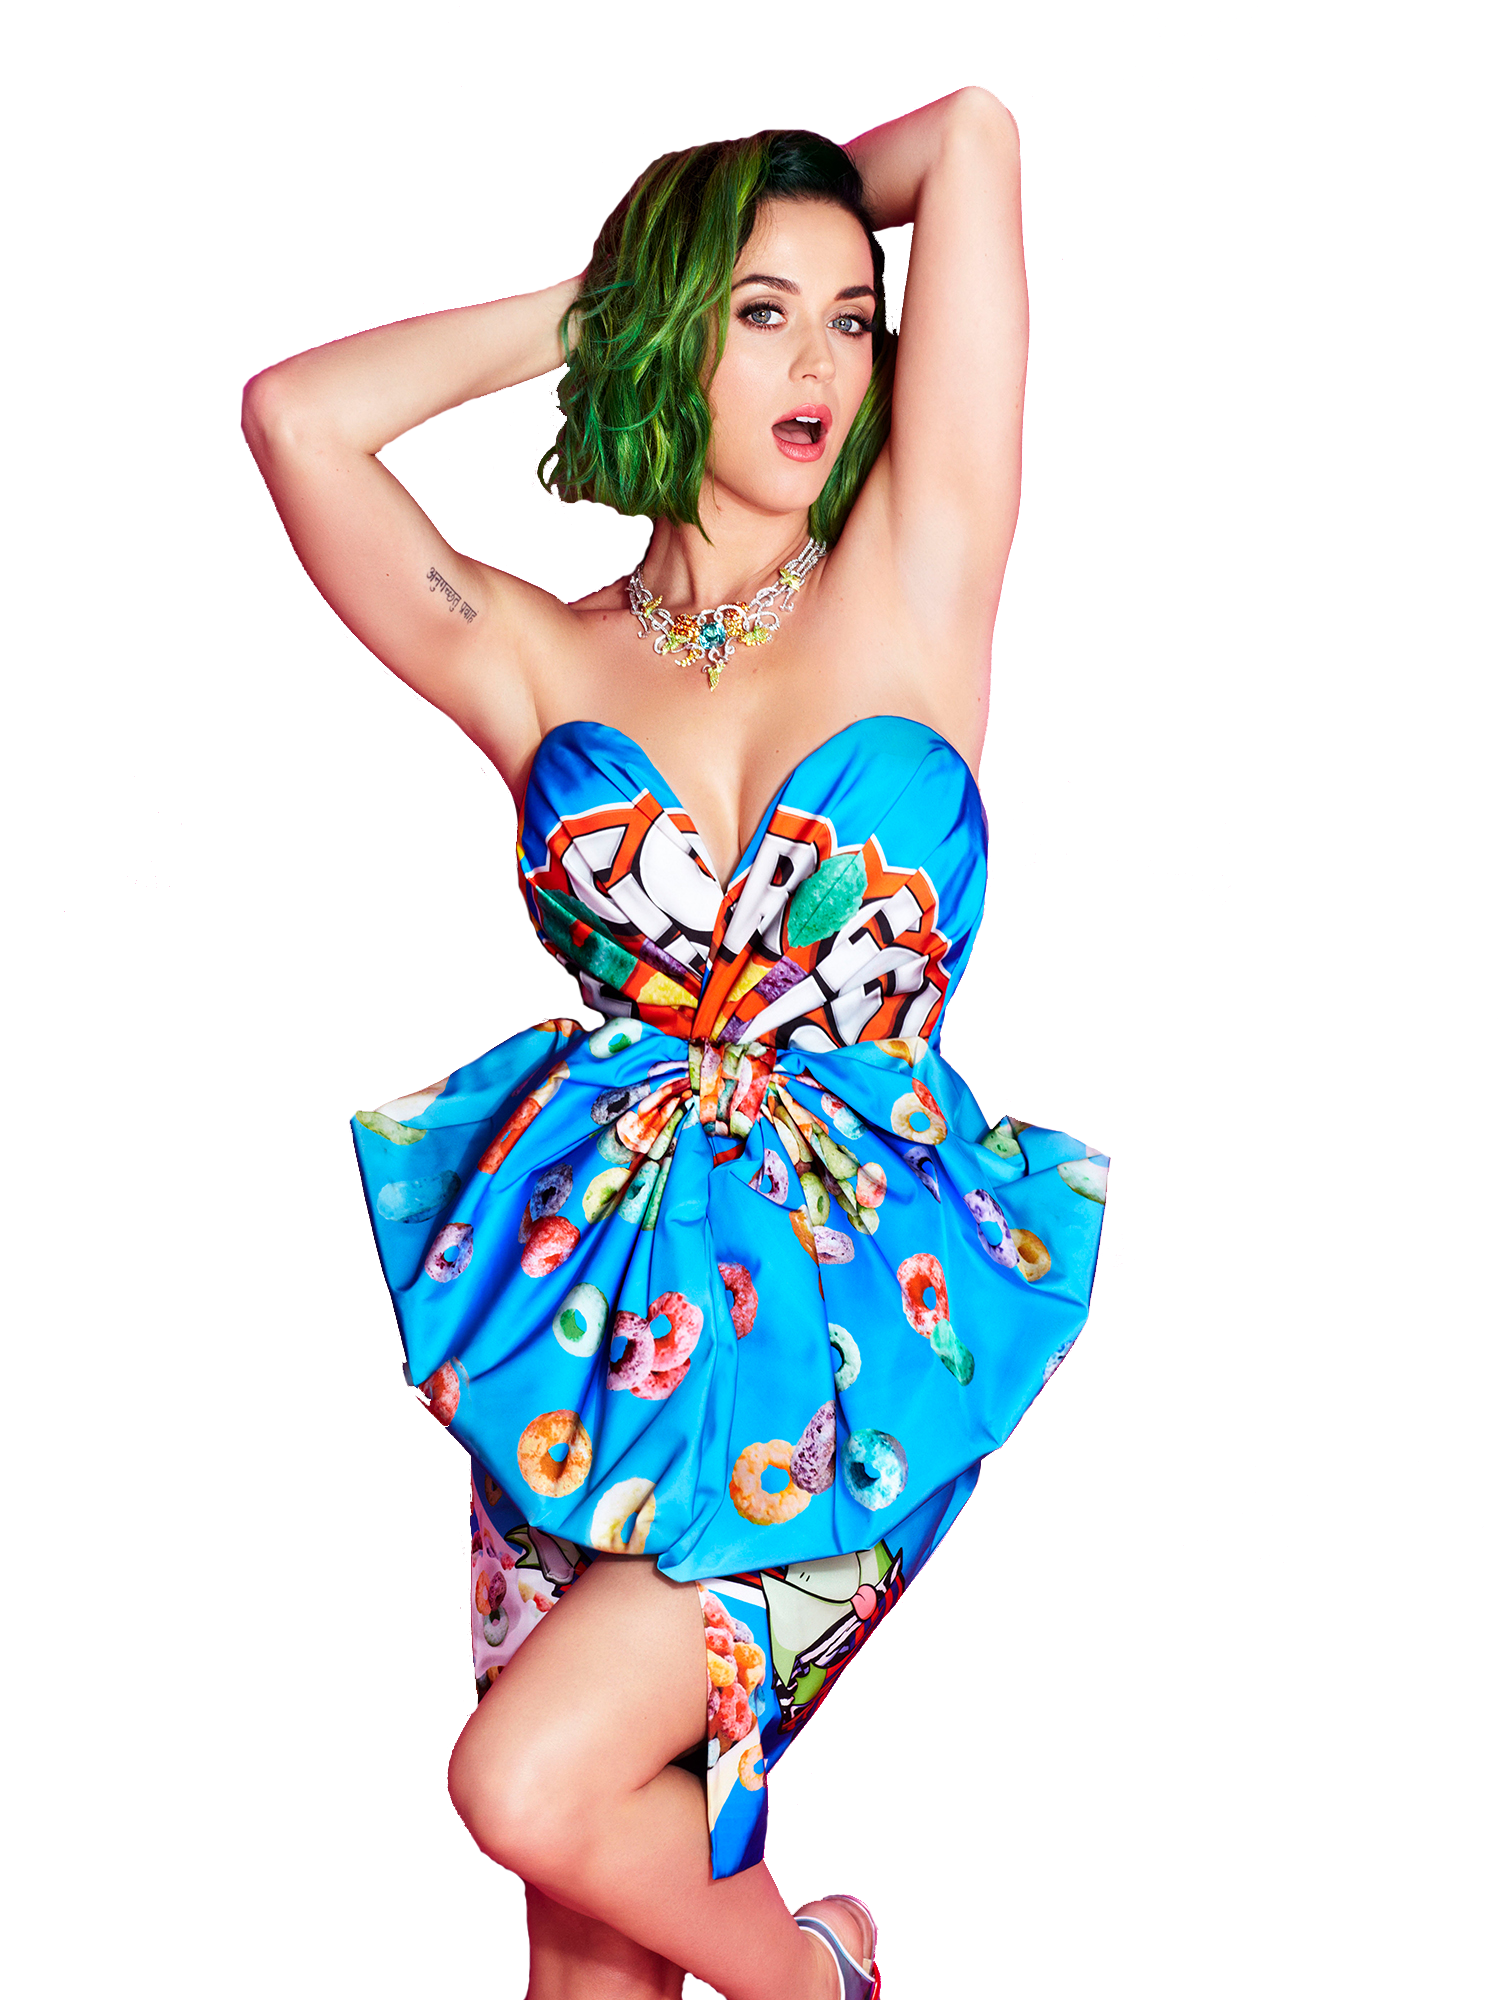 Hair Katy Perry Green Download HD PNG Image